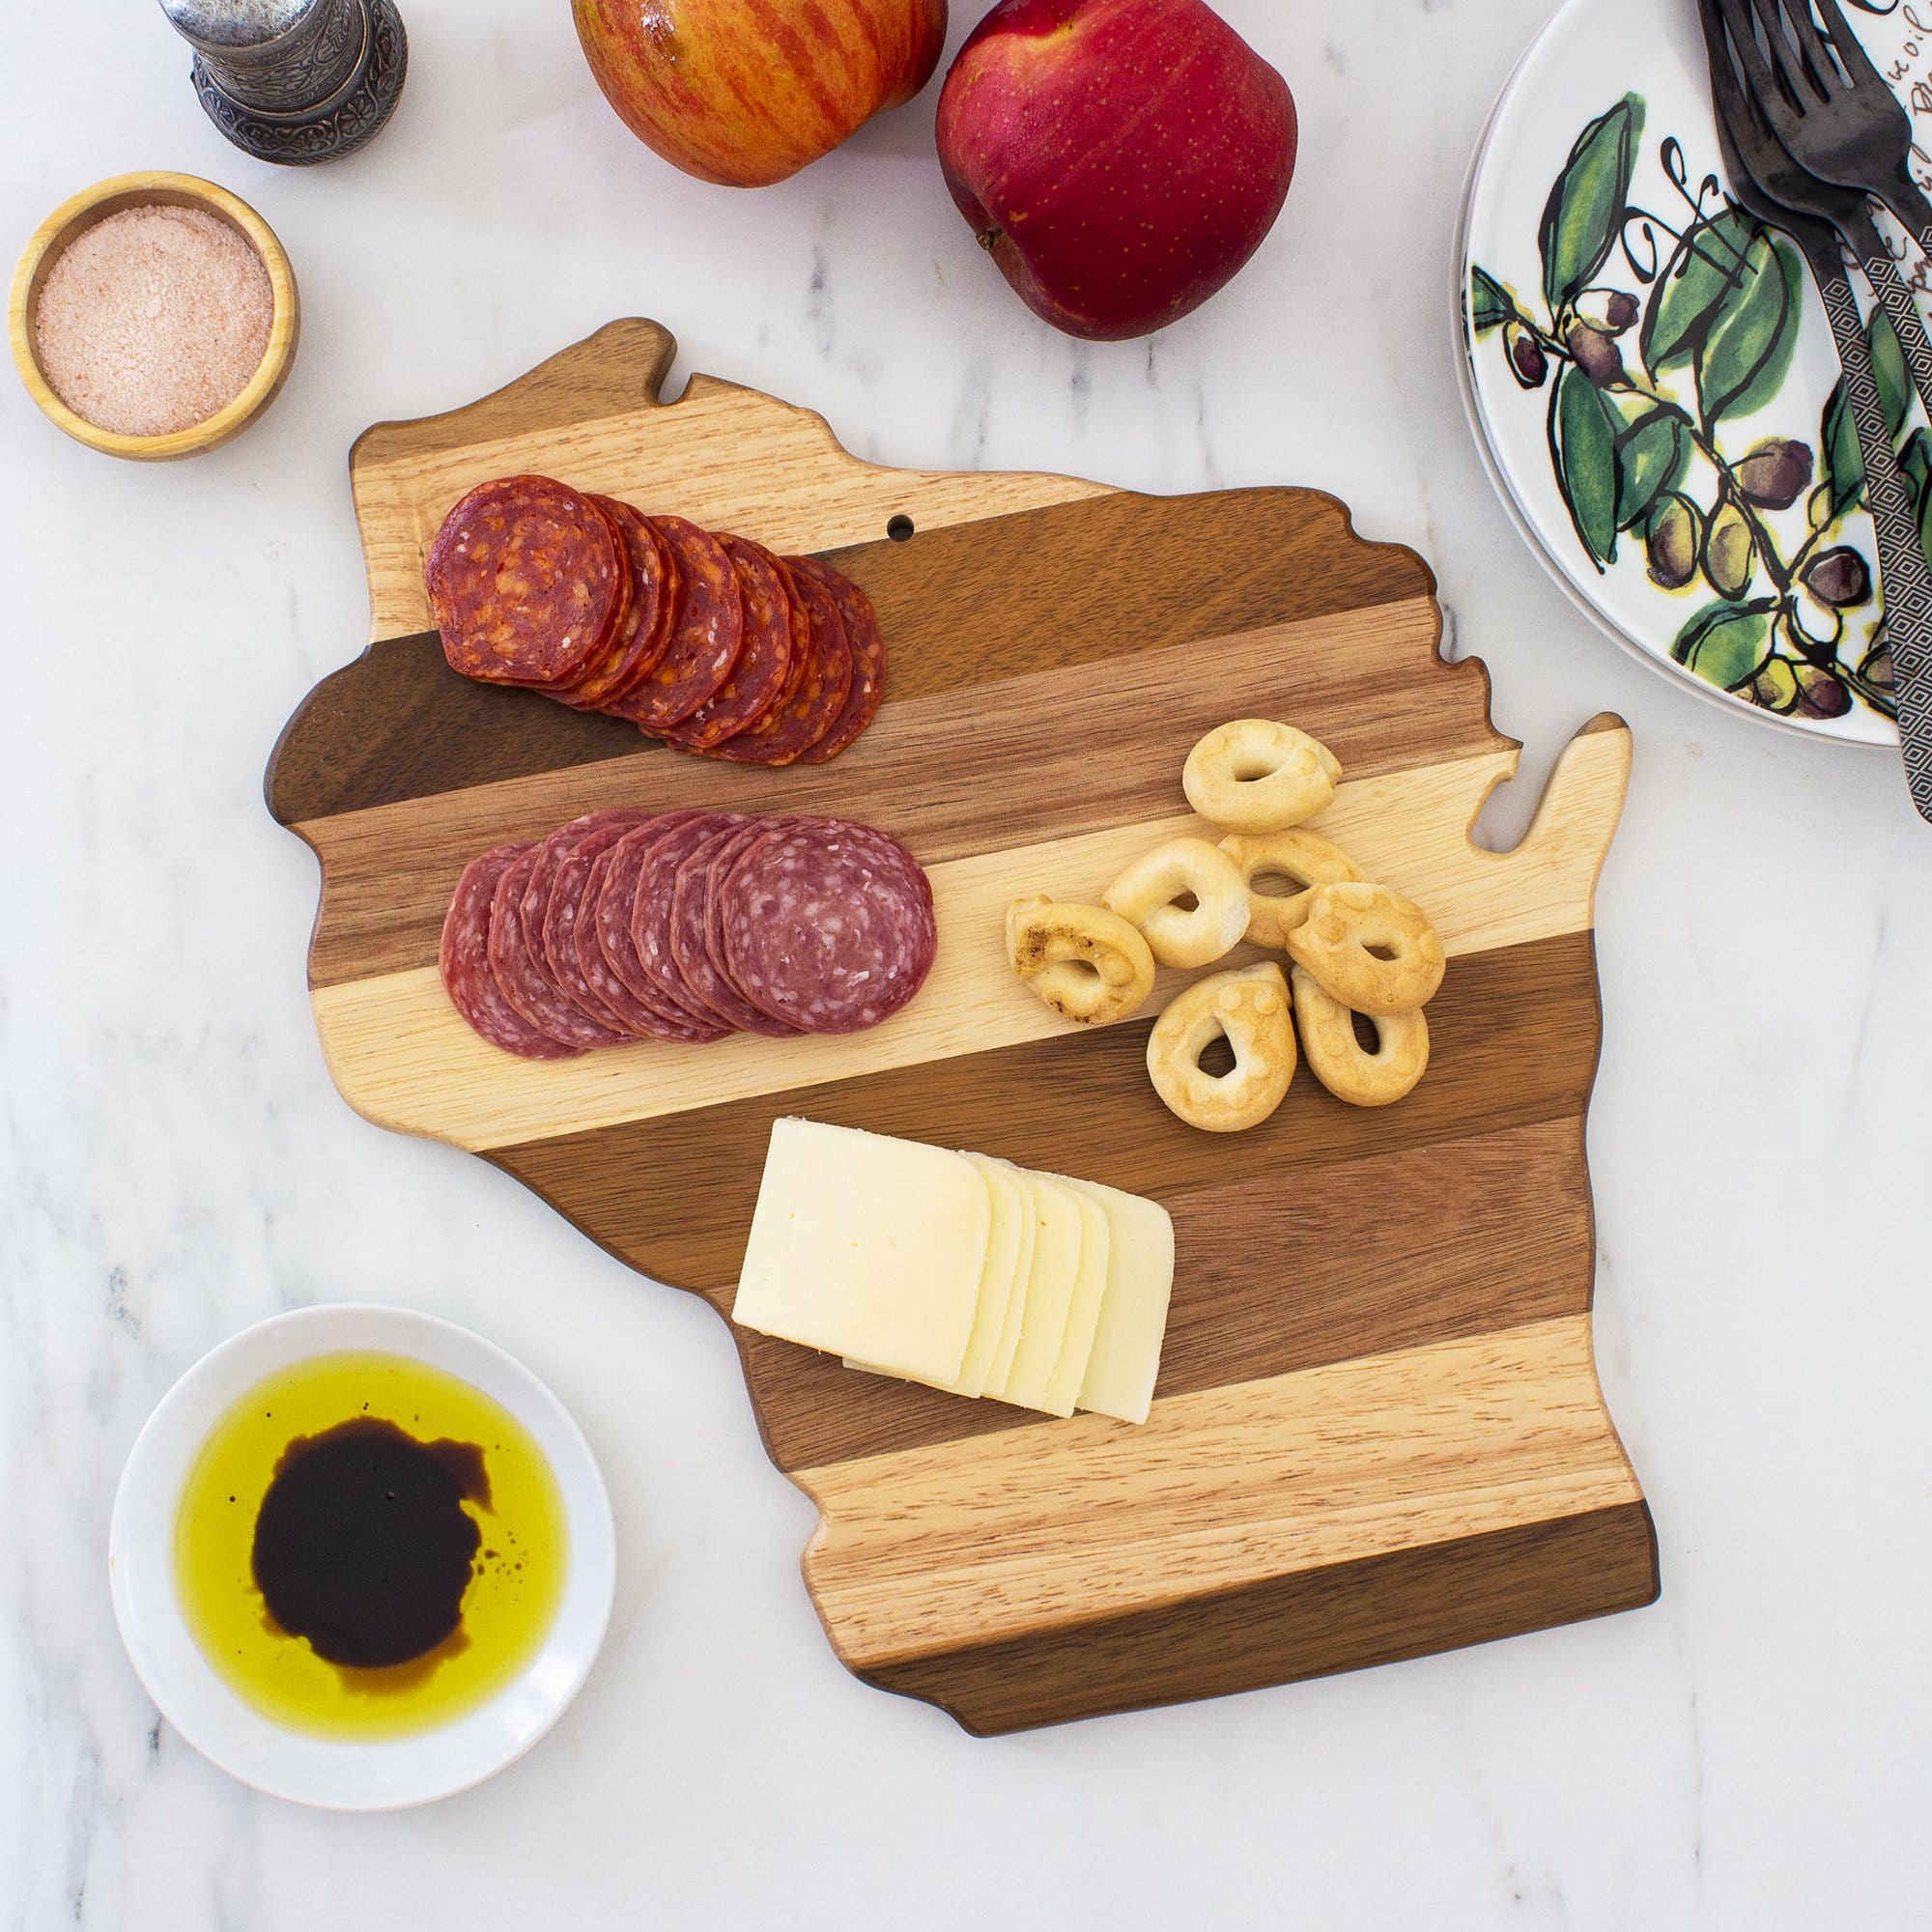 Totally Bamboo Rock & Branch® Shiplap Series Wisconsin State Shaped Wood Serving and Cutting Board